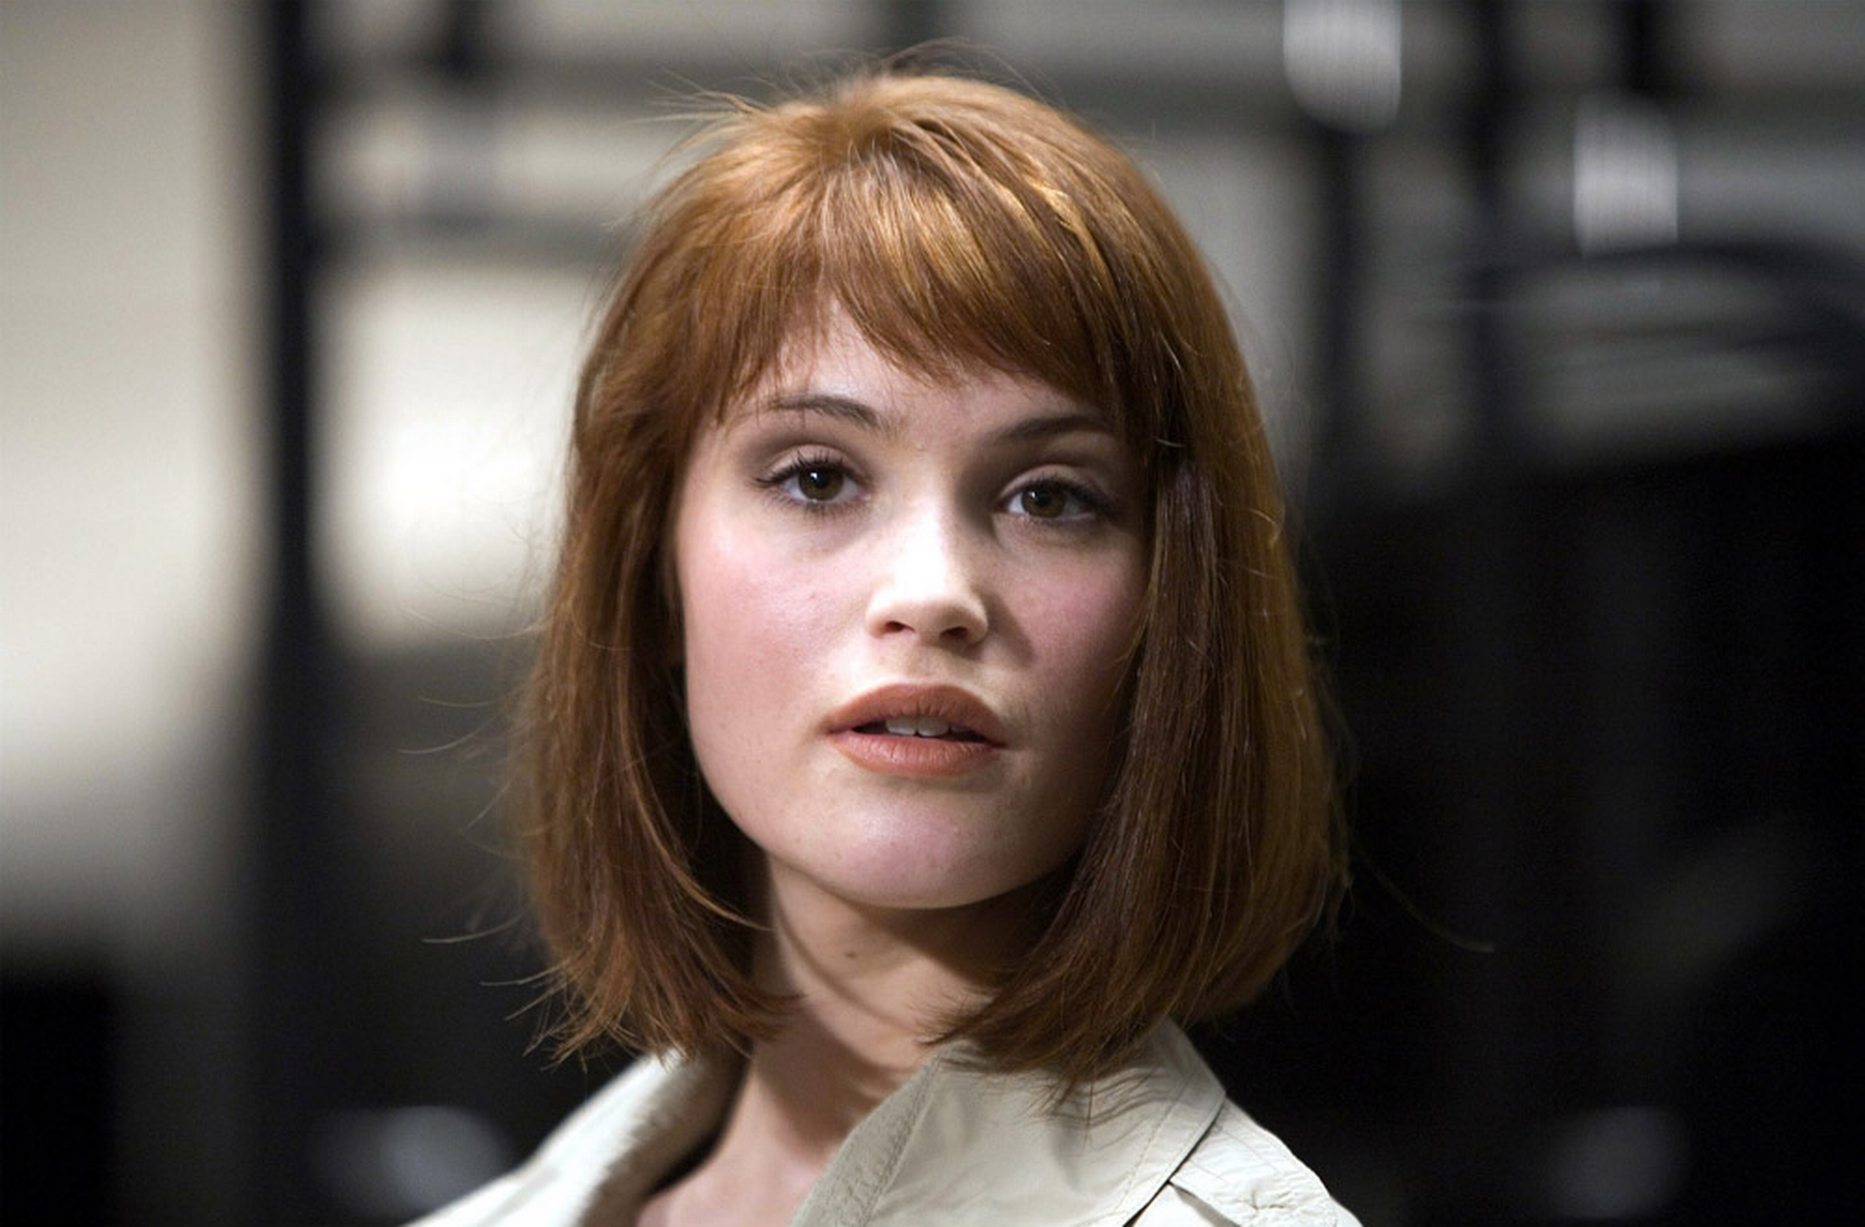 Gemma Artertron as Strawberry Fields in Quantum of Solace